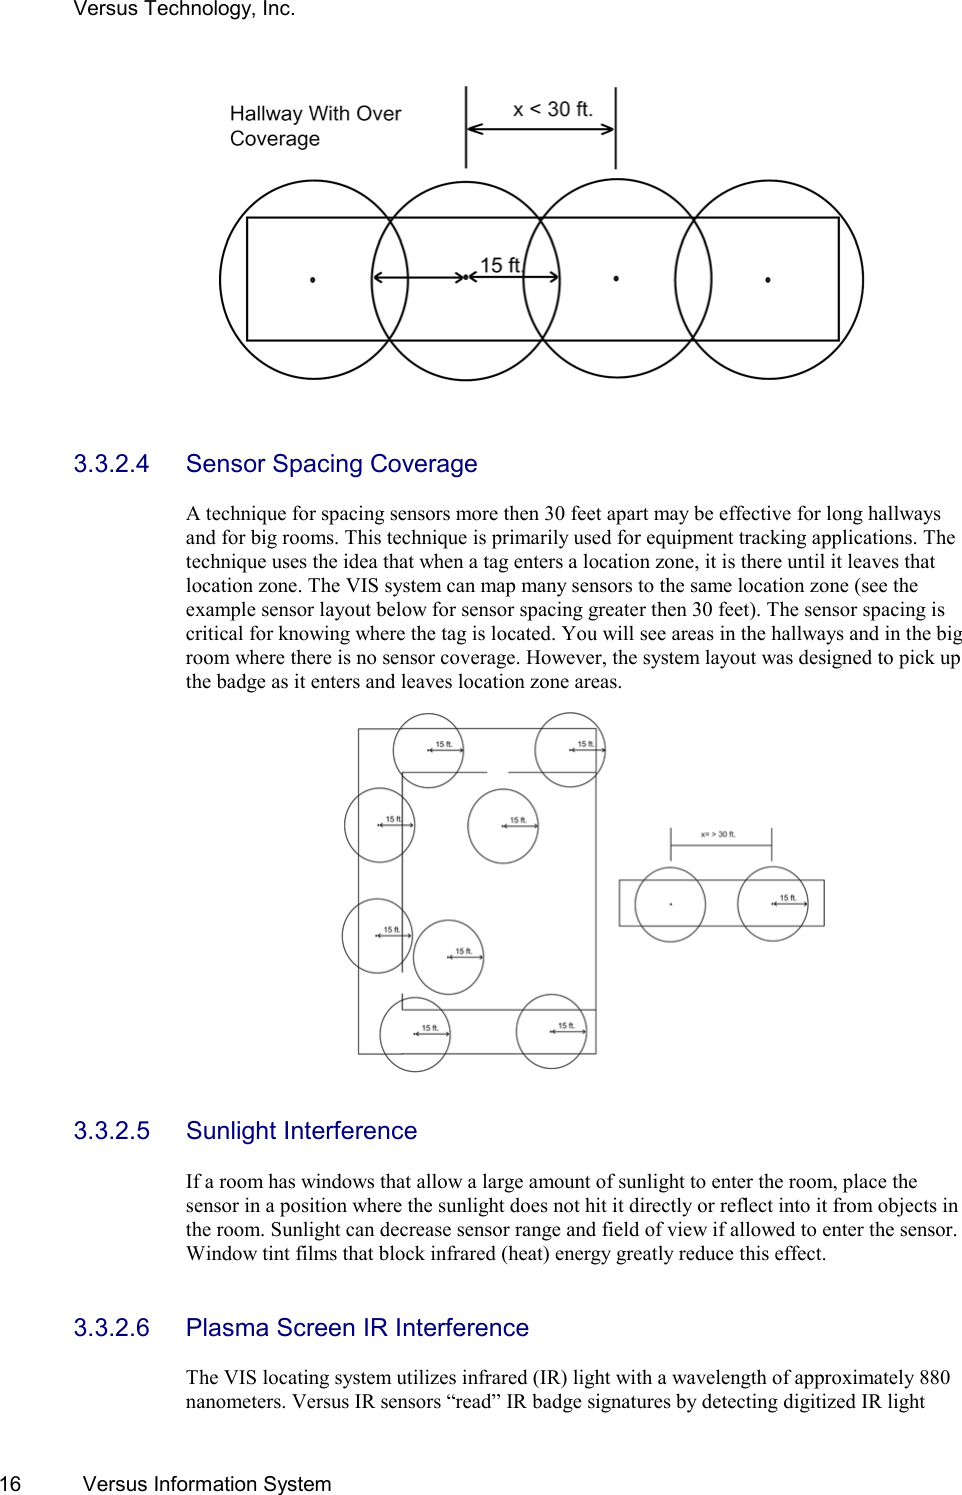 Versus Technology, Inc. 16  Versus Information System    3.3.2.4  Sensor Spacing Coverage  A technique for spacing sensors more then 30 feet apart may be effective for long hallways and for big rooms. This technique is primarily used for equipment tracking applications. The technique uses the idea that when a tag enters a location zone, it is there until it leaves that location zone. The VIS system can map many sensors to the same location zone (see the example sensor layout below for sensor spacing greater then 30 feet). The sensor spacing is critical for knowing where the tag is located. You will see areas in the hallways and in the big room where there is no sensor coverage. However, the system layout was designed to pick up the badge as it enters and leaves location zone areas.     3.3.2.5 Sunlight Interference  If a room has windows that allow a large amount of sunlight to enter the room, place the sensor in a position where the sunlight does not hit it directly or reflect into it from objects in the room. Sunlight can decrease sensor range and field of view if allowed to enter the sensor. Window tint films that block infrared (heat) energy greatly reduce this effect.   3.3.2.6  Plasma Screen IR Interference  The VIS locating system utilizes infrared (IR) light with a wavelength of approximately 880 nanometers. Versus IR sensors “read” IR badge signatures by detecting digitized IR light 